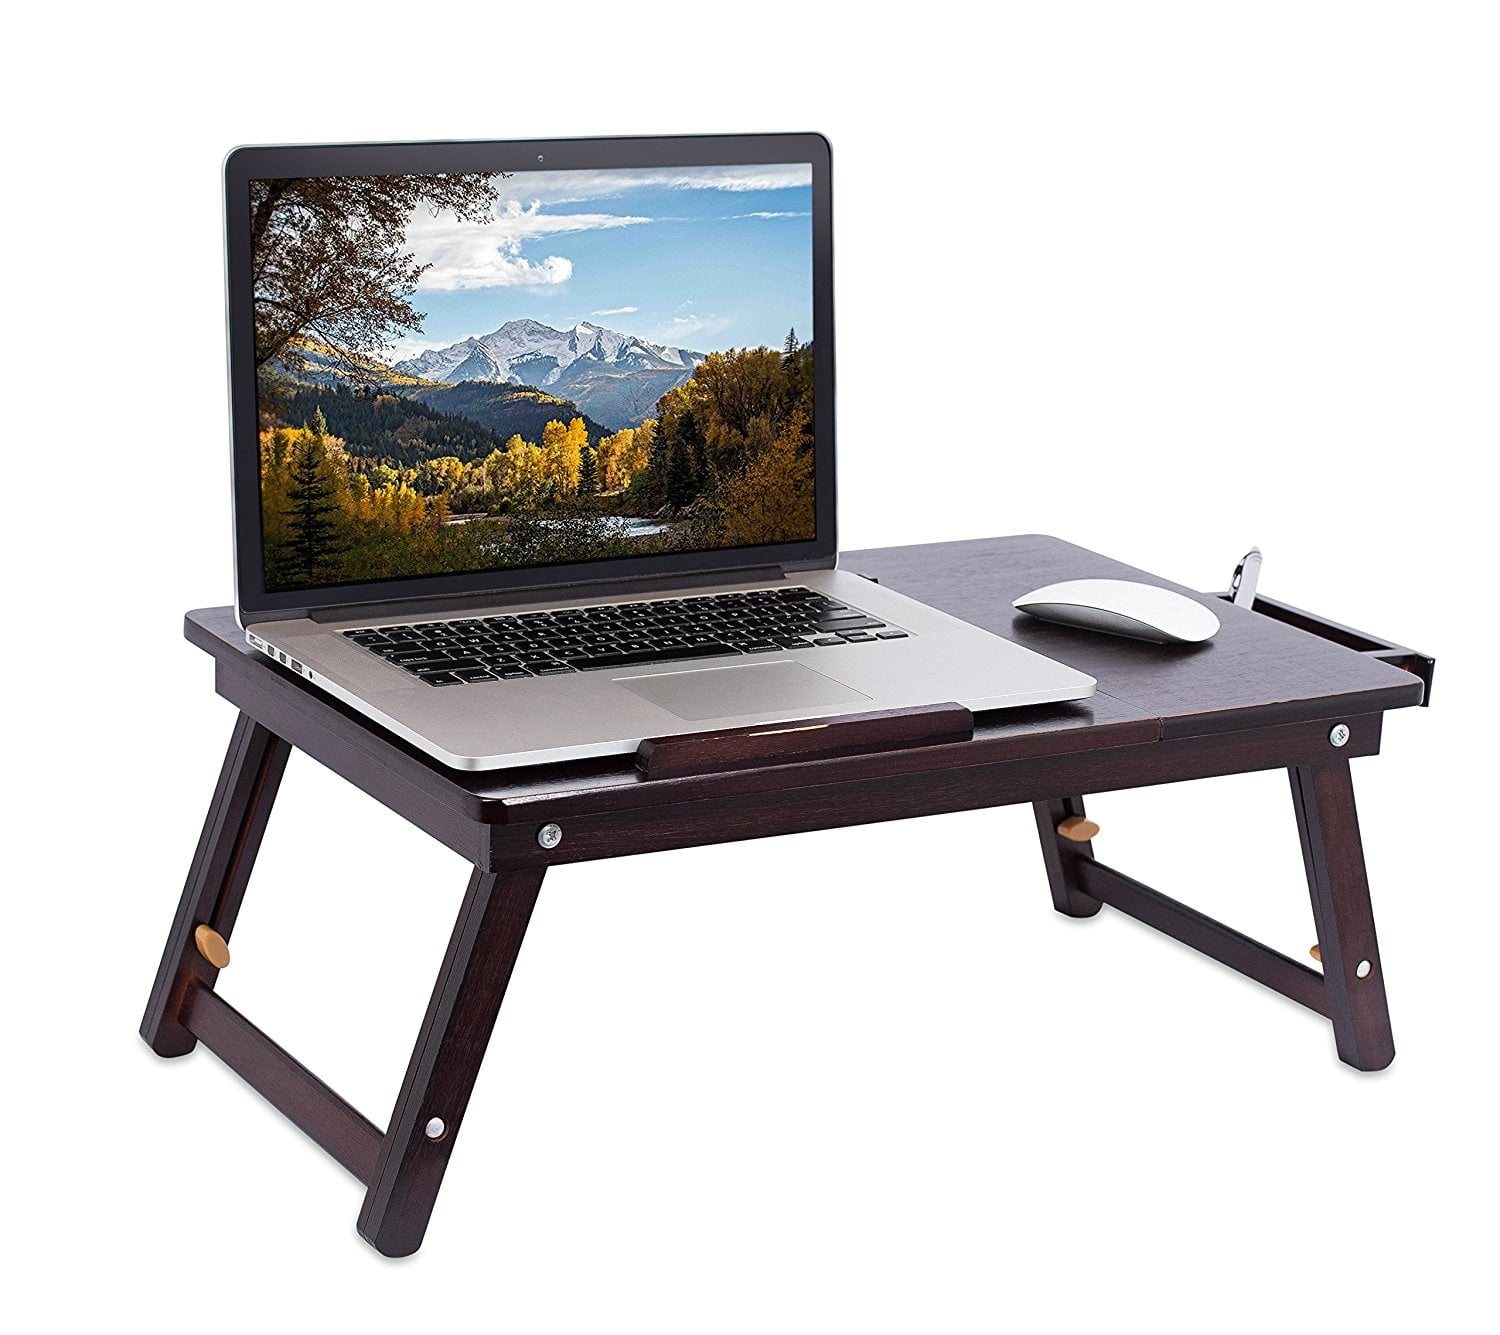 Portable Folding Laptop Computer Table Multifunctional Desk with Fan Mouse Tray 